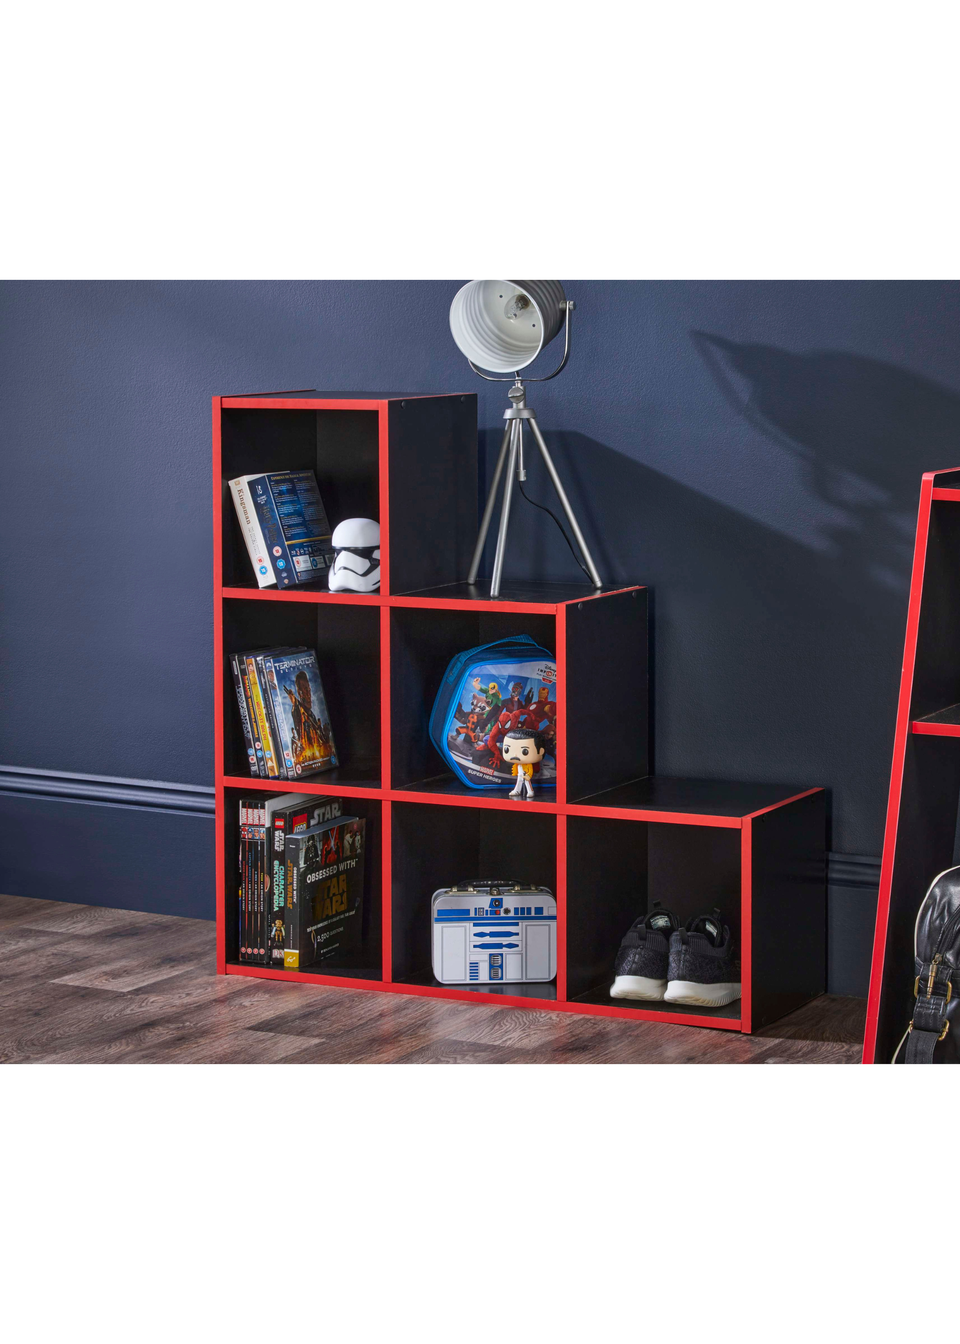 Lloyd Pascal 6 Stepped Cube Storage Unit in Black and Red